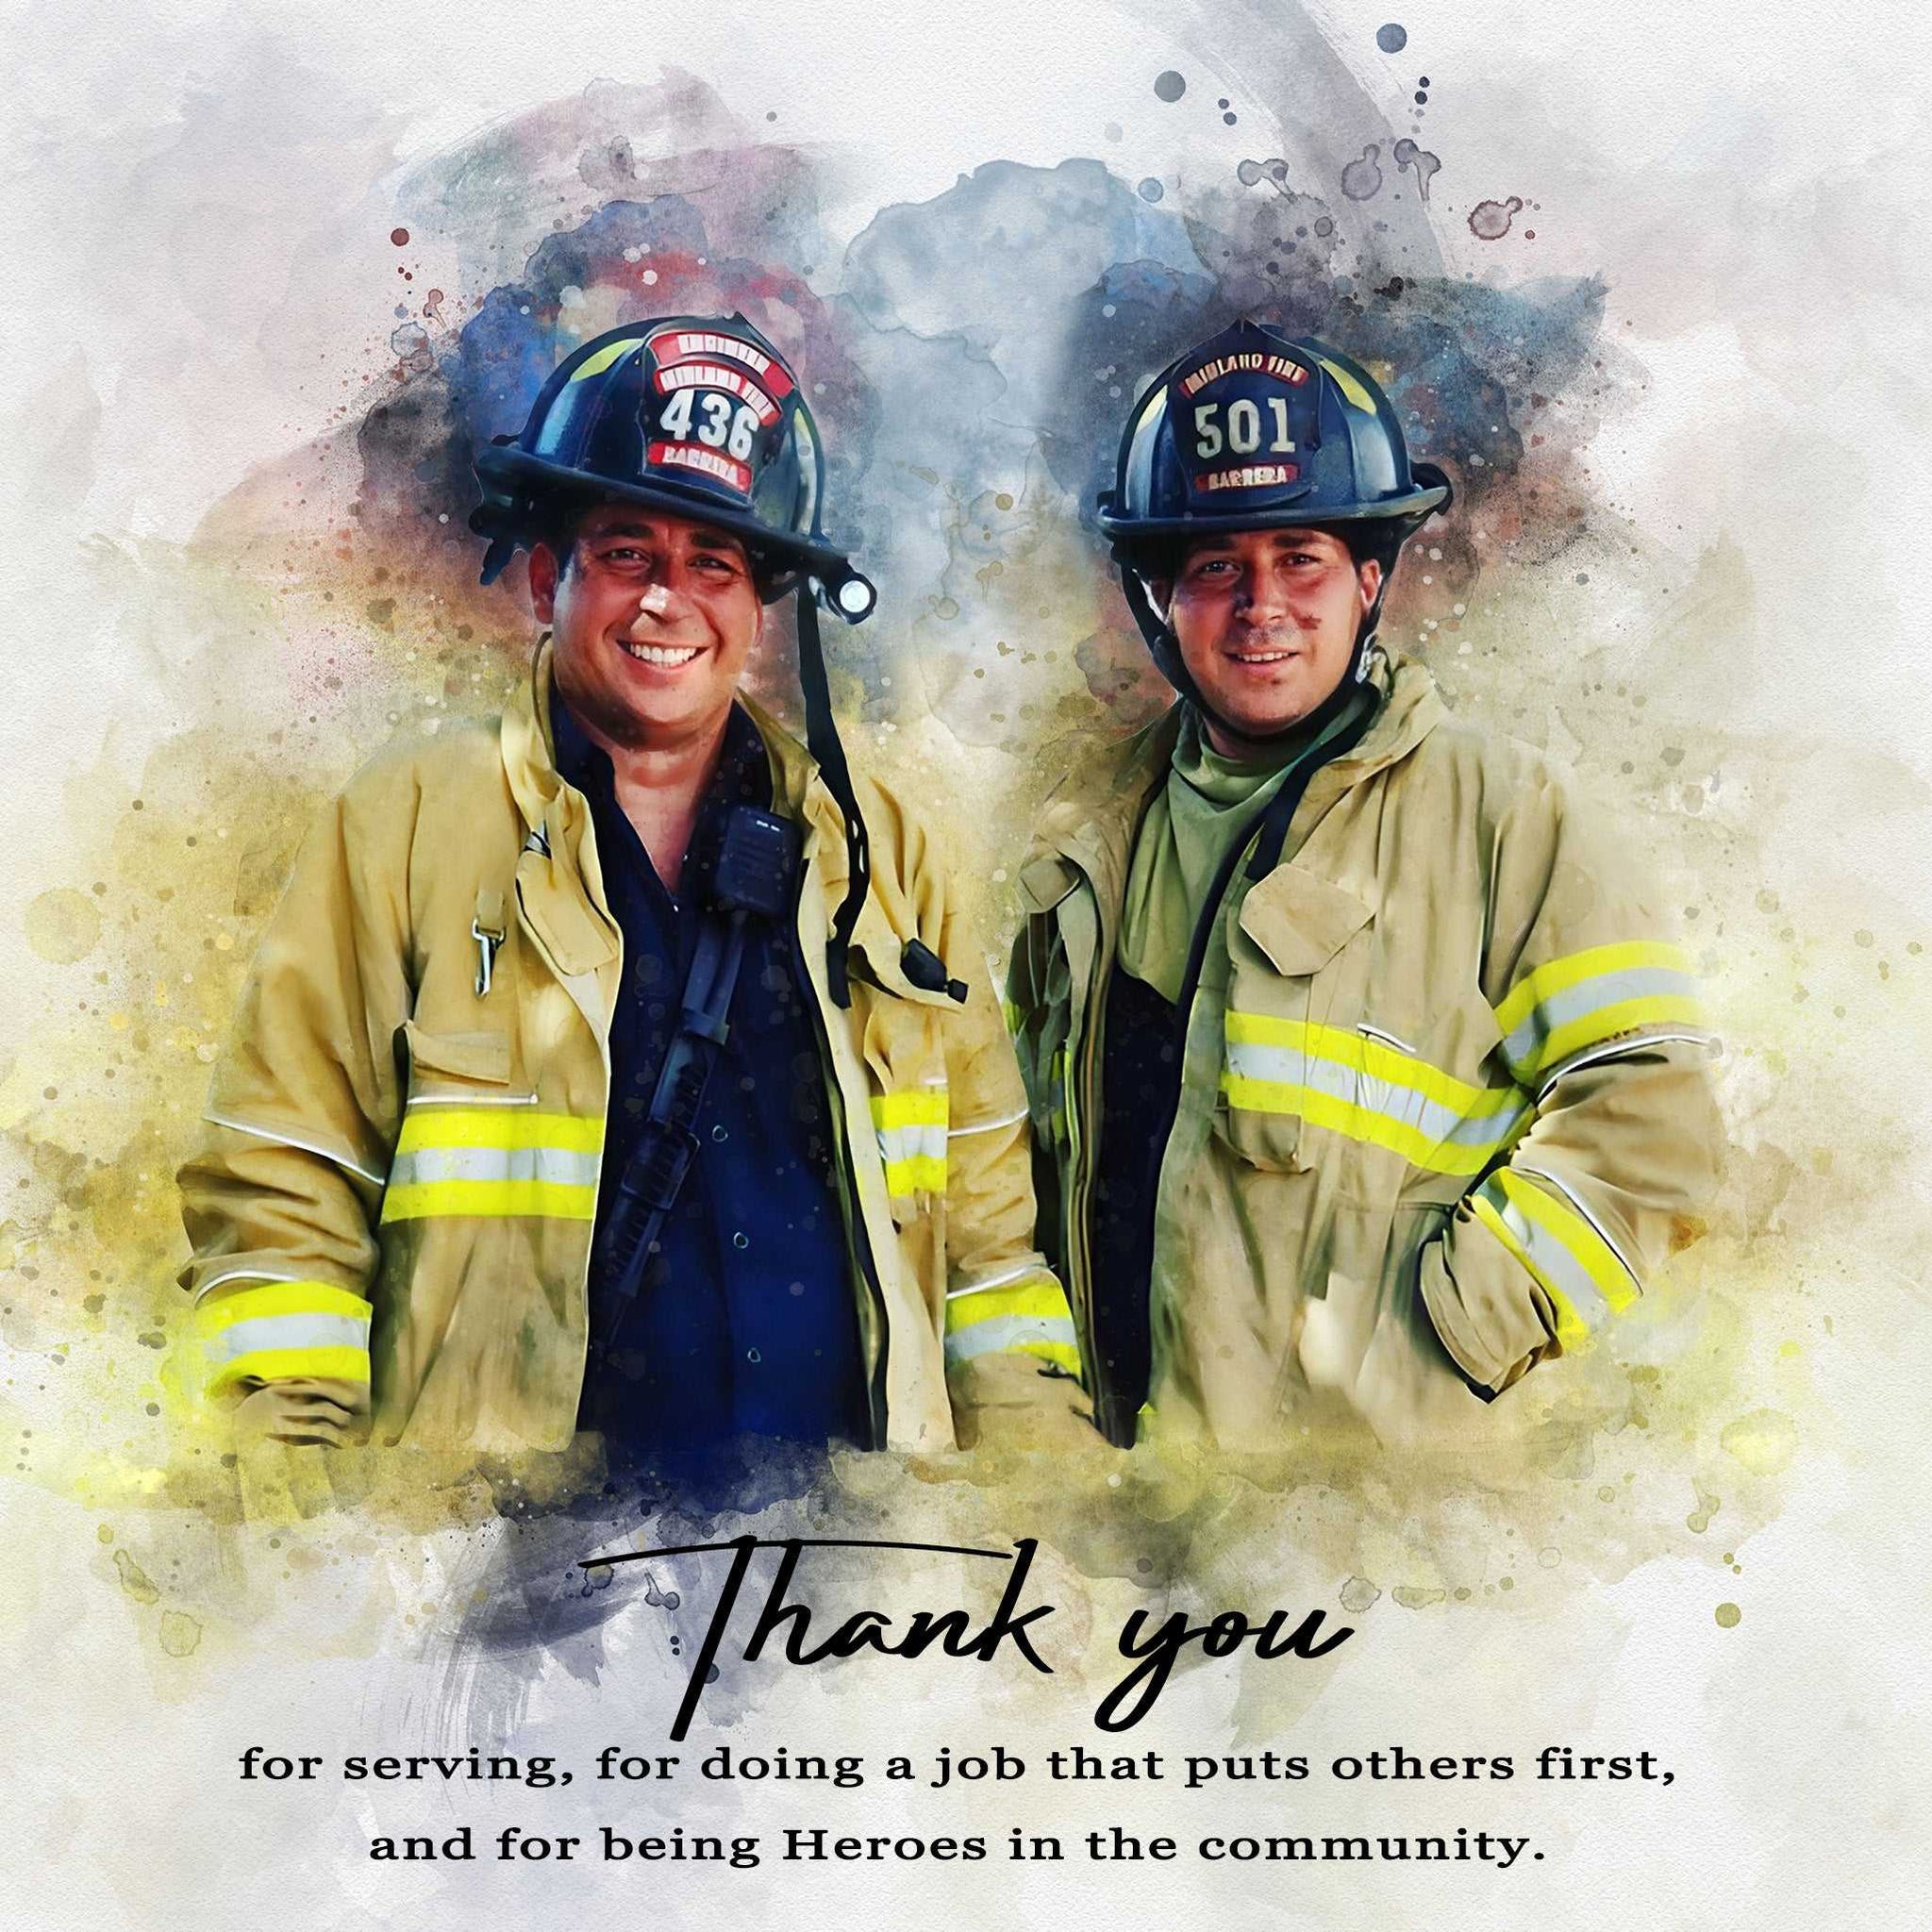 Fireman Gifts | Fire Department Gifts | Firefighter Retirement Gifts | Firefighter Presents Ideas | Firefighter Gifts - FromPicToArt